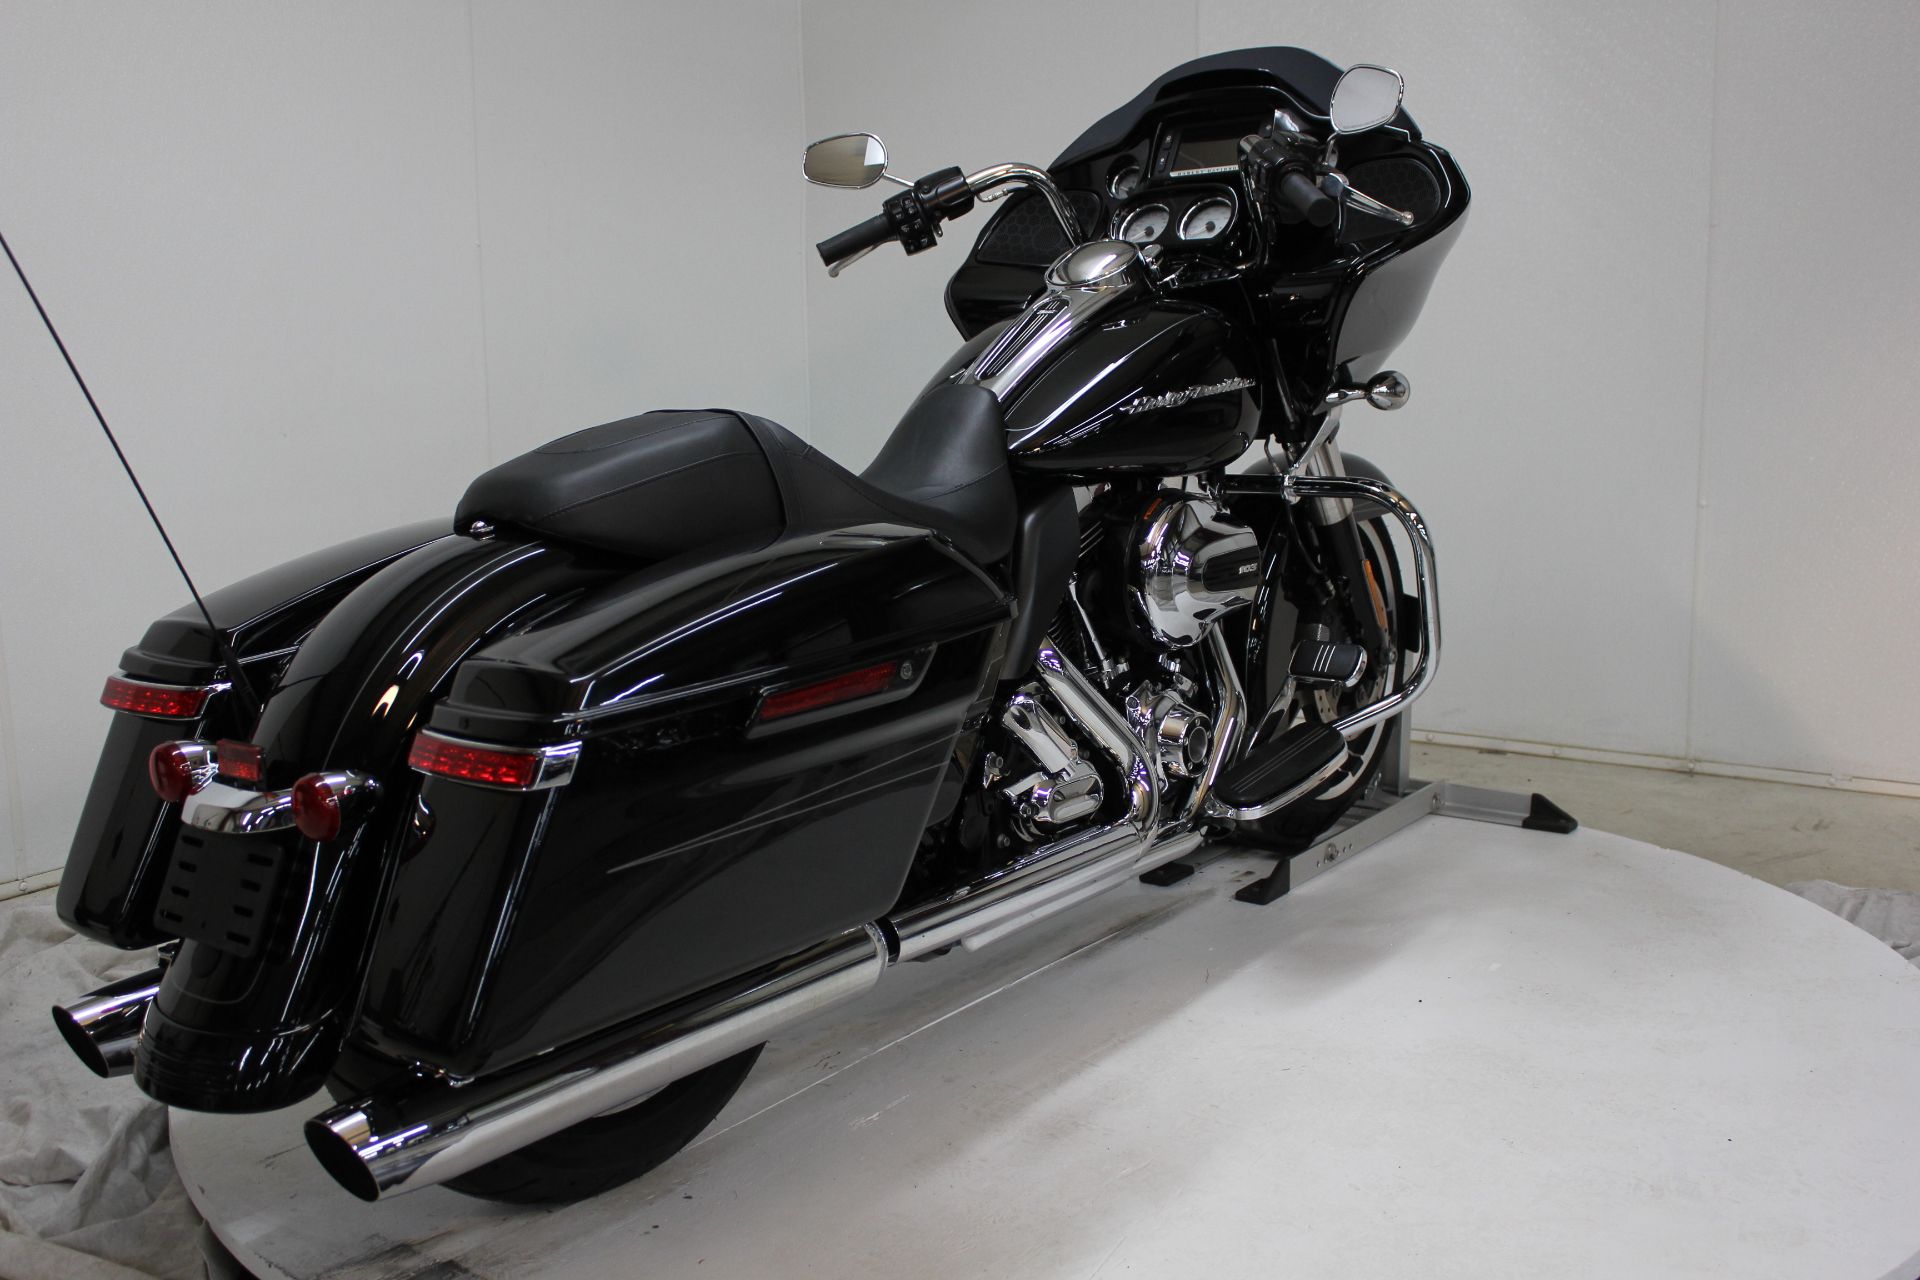 2015 Harley-Davidson Road Glide® Special in Pittsfield, Massachusetts - Photo 4